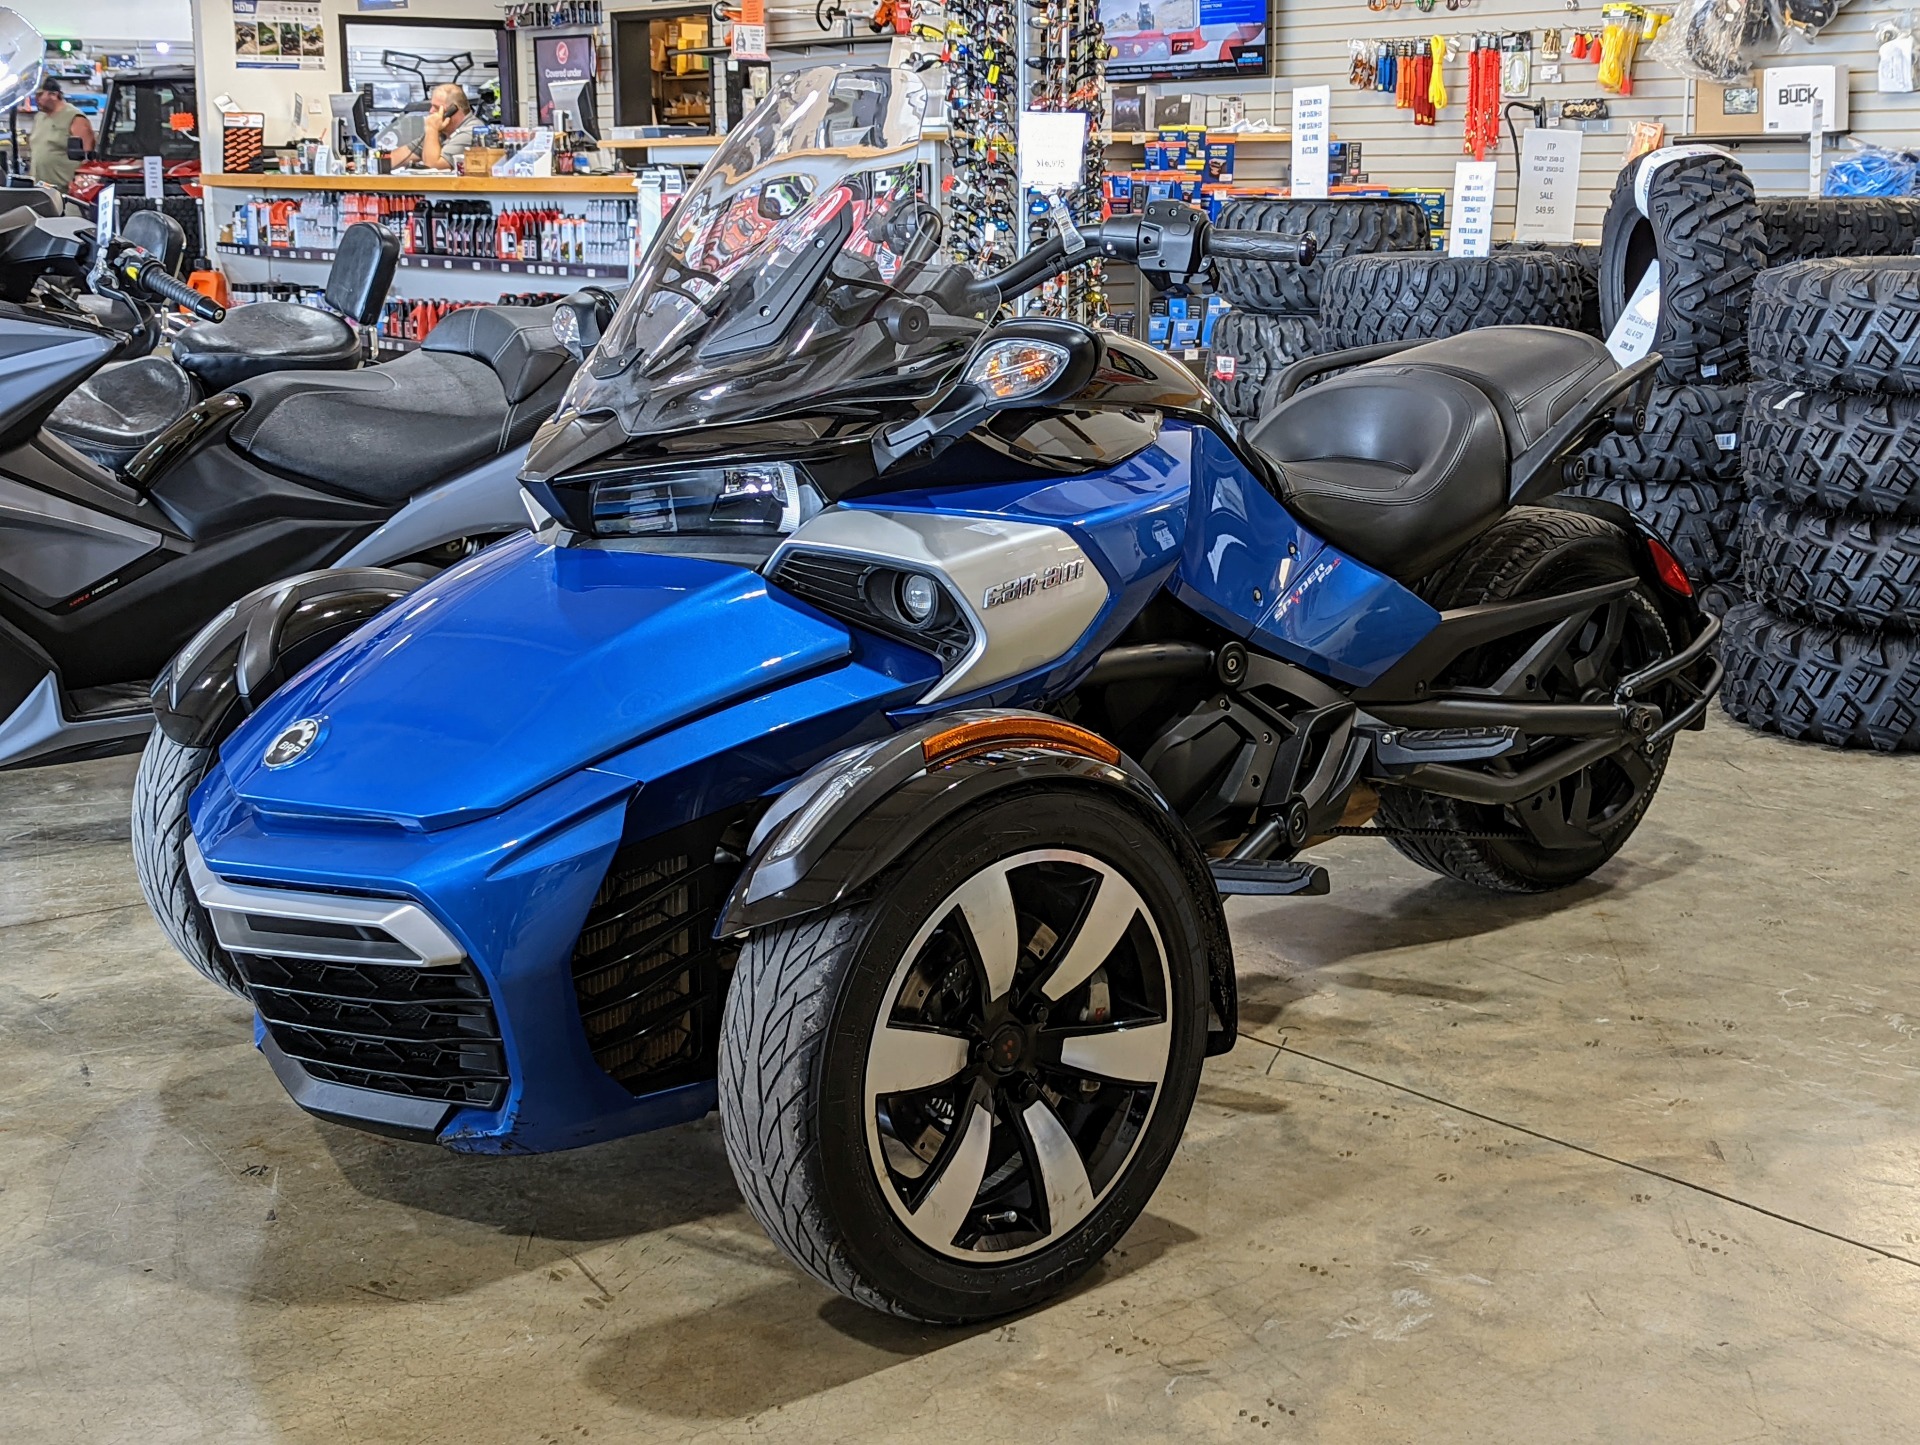 2017 Can-Am Spyder F3-S SE6 in Winchester, Tennessee - Photo 2